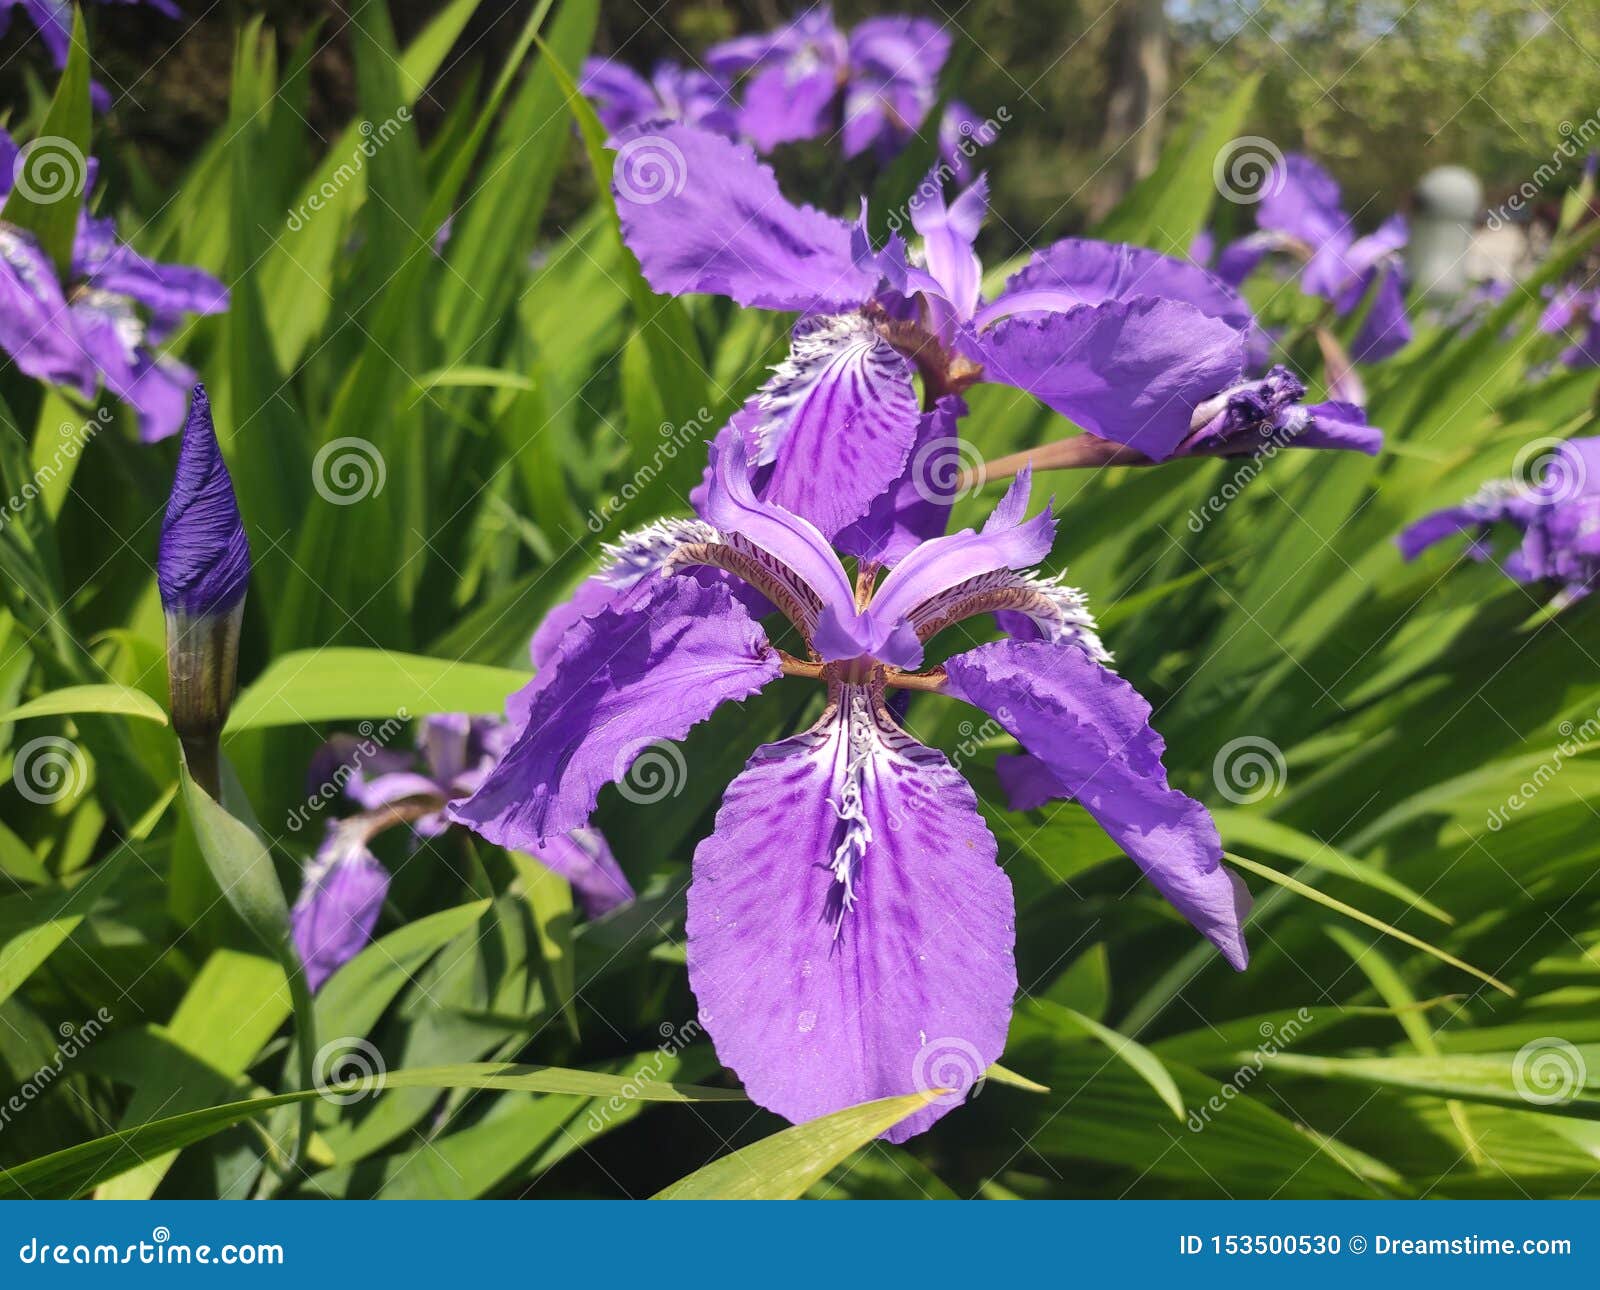 beautiful purple flower in its full bloom during gorgeous spring